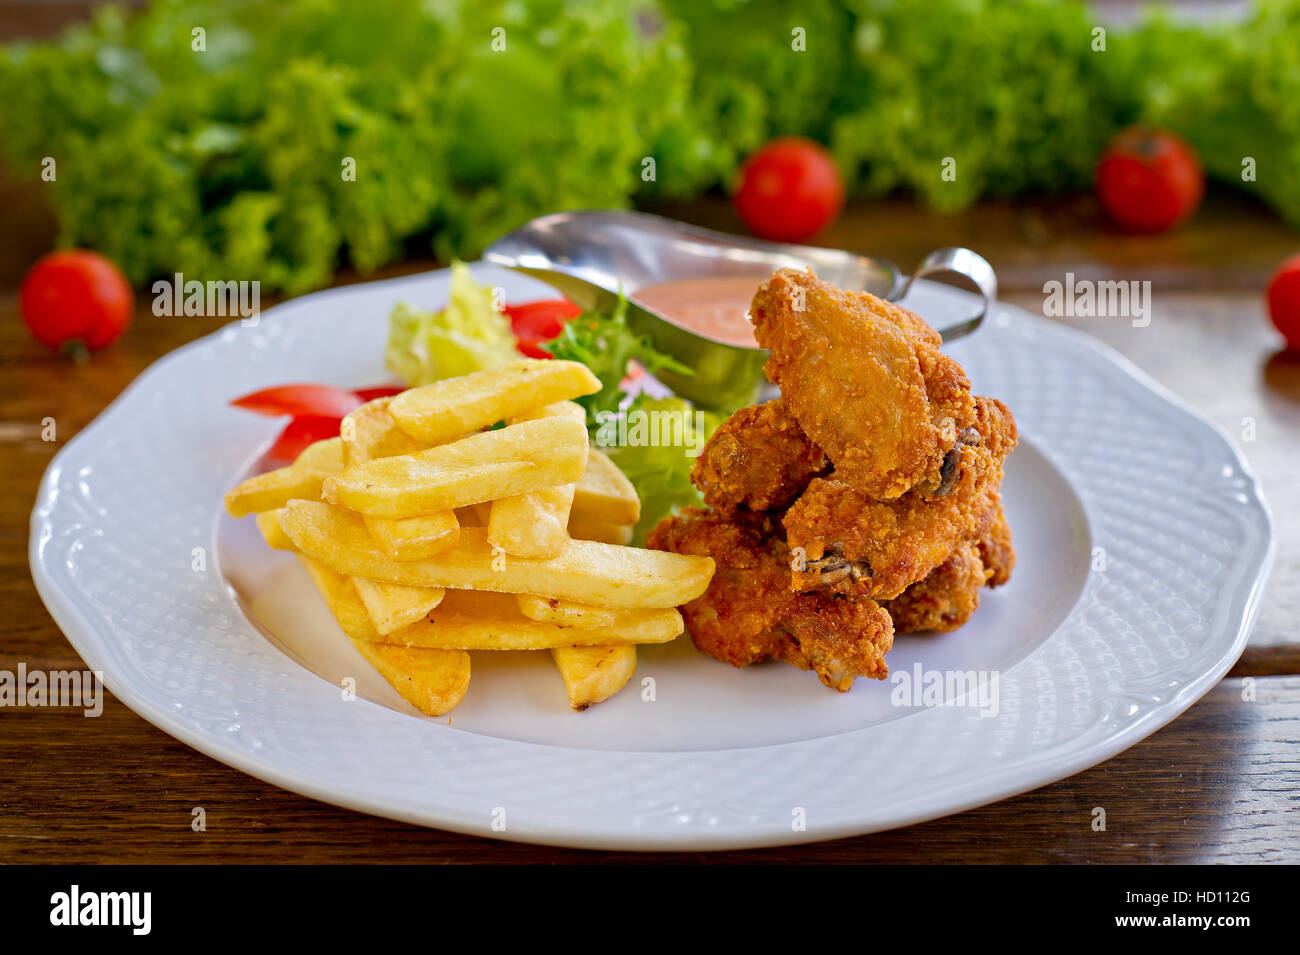 Gourmet Appetizing Chicken and Fries Meal on a White Plate with Fresh Lettuce, tomatoes slice, ketchup sauce. Stock Photo